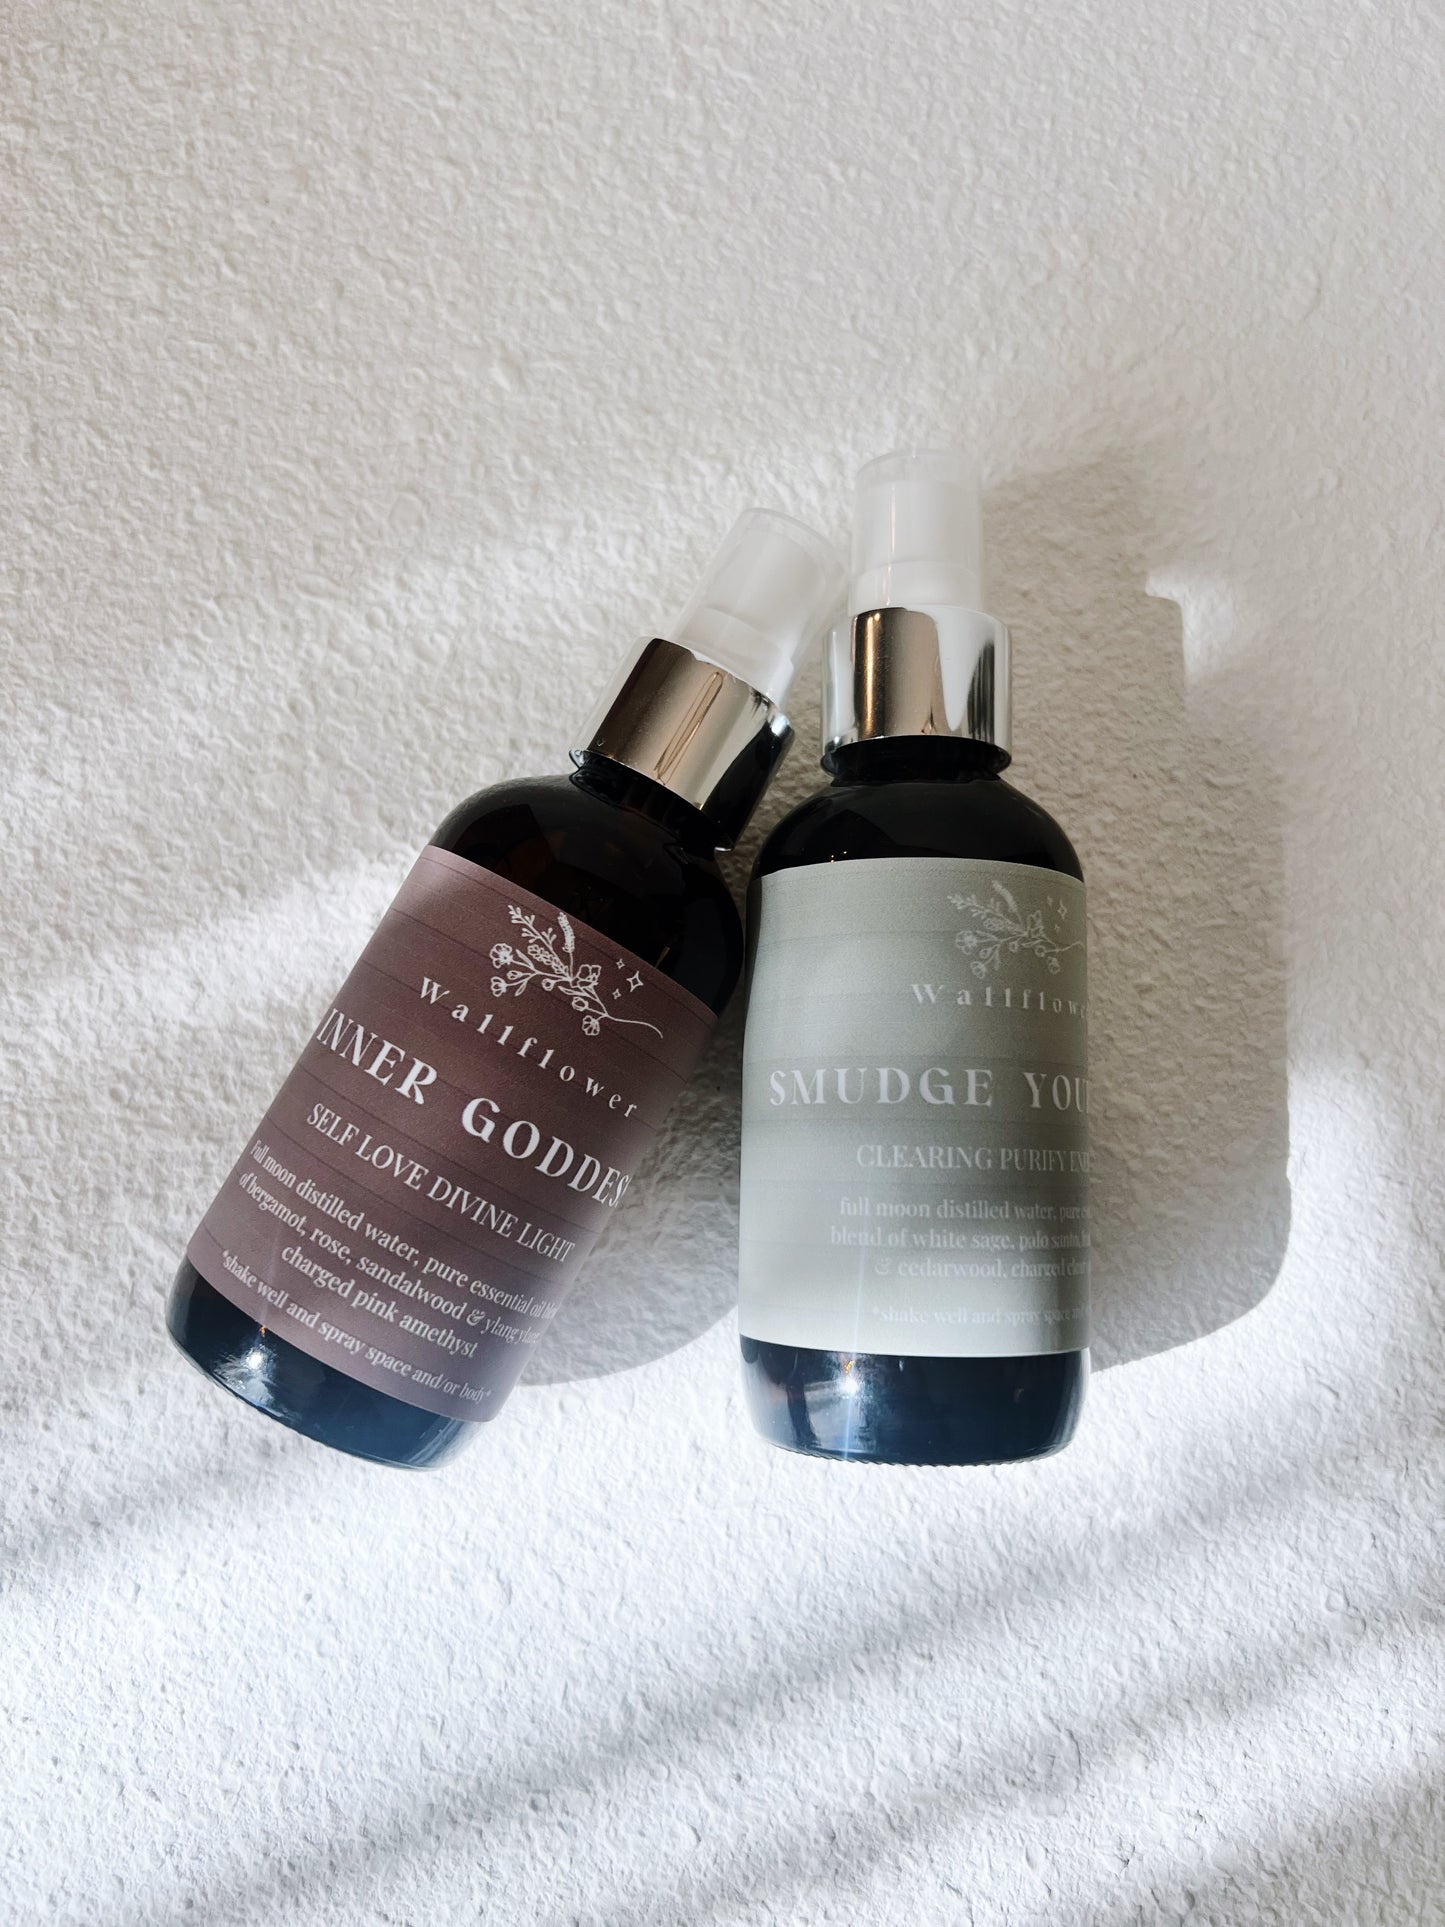 Room and Body Mist